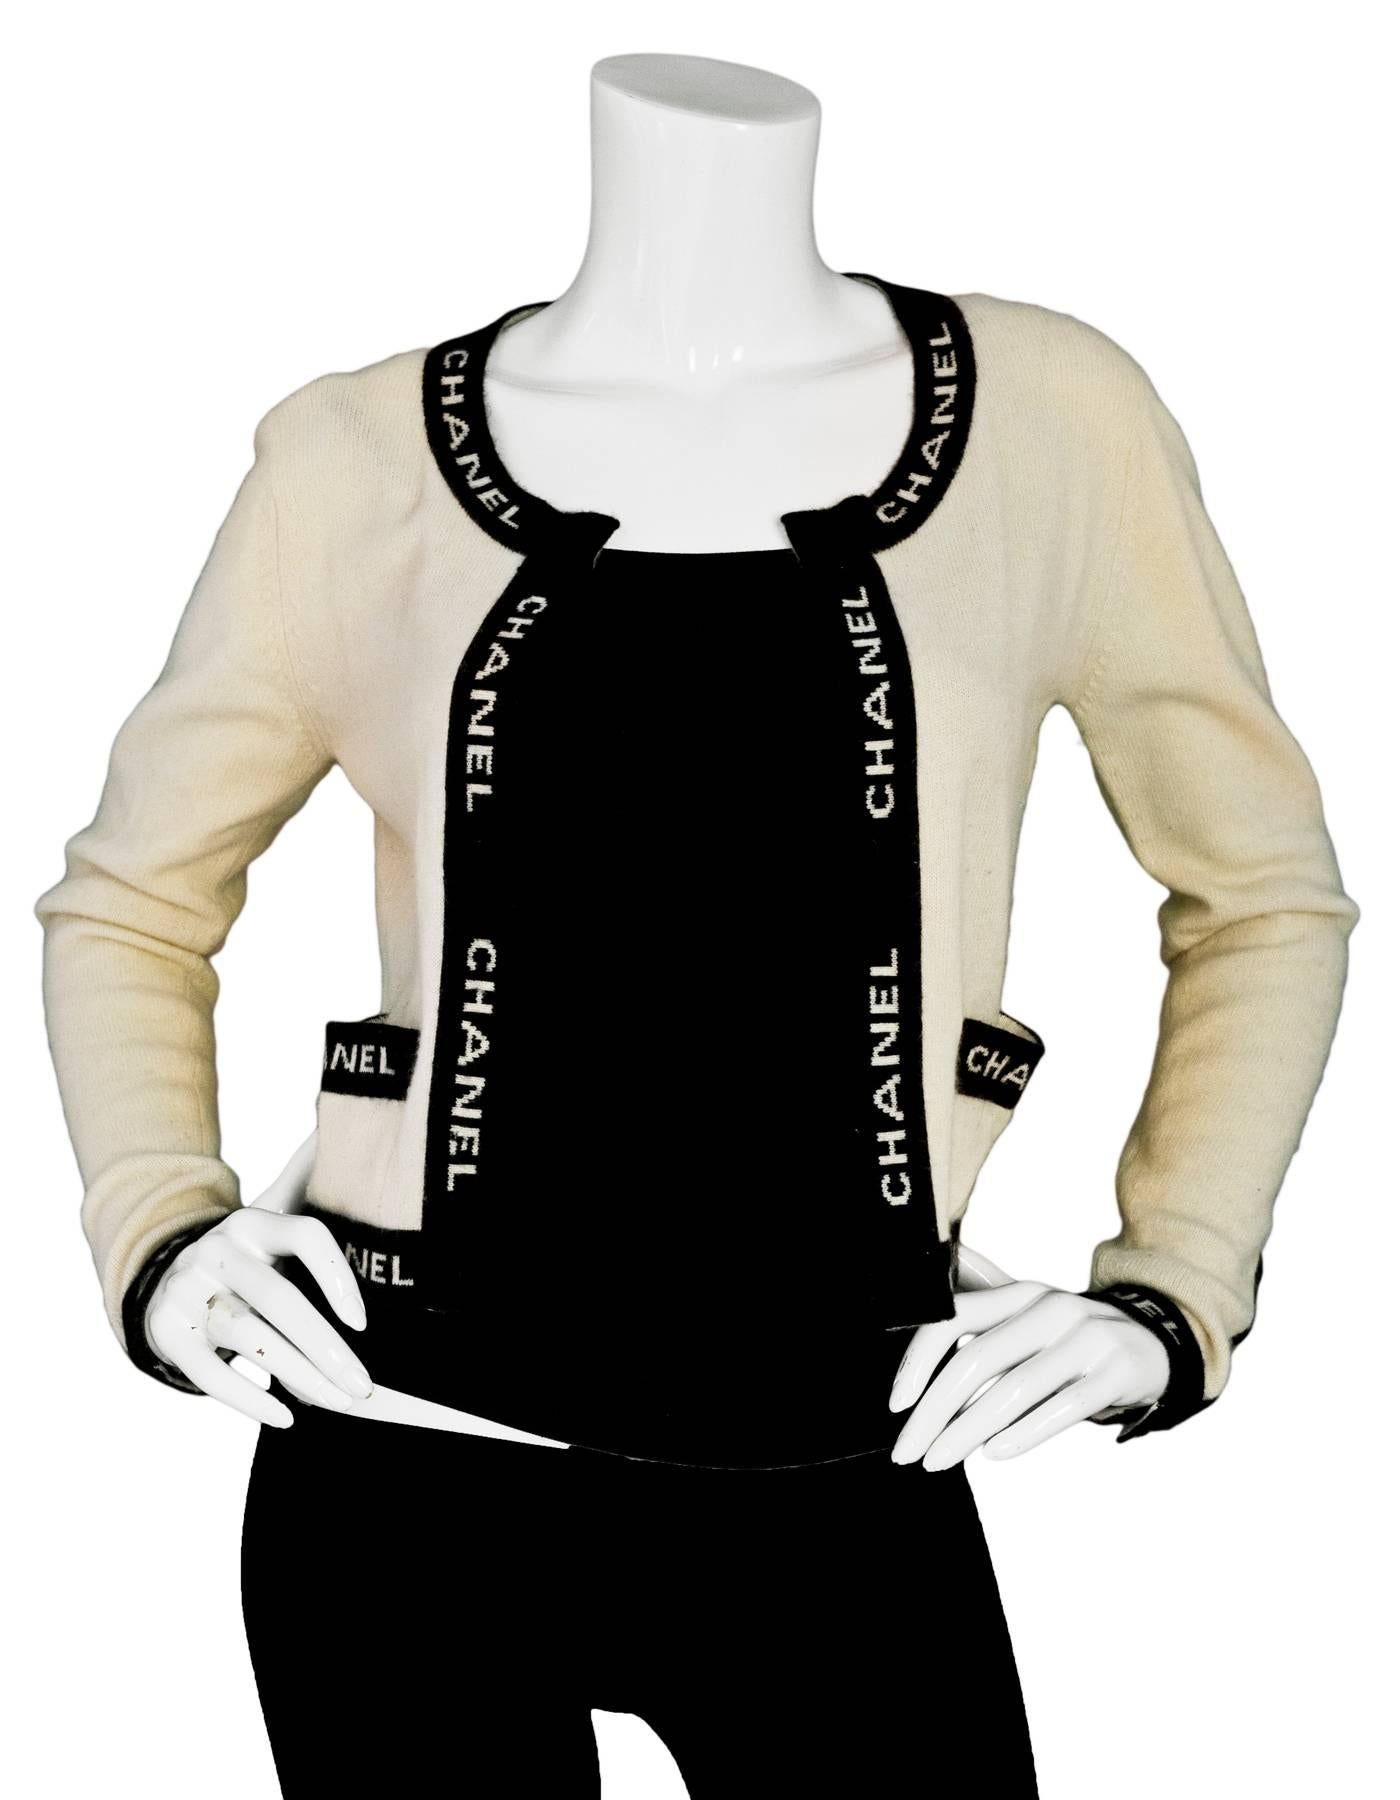 Chanel Beige & Black CHANEL Sweater

Color: Beige, black
Materials: not listed, feels like cashmere
Lining: None
Closure/Opening: Open front
Exterior Pockets: Flat pockets
Overall Condition: Very good pre-owned condition with the exception of some